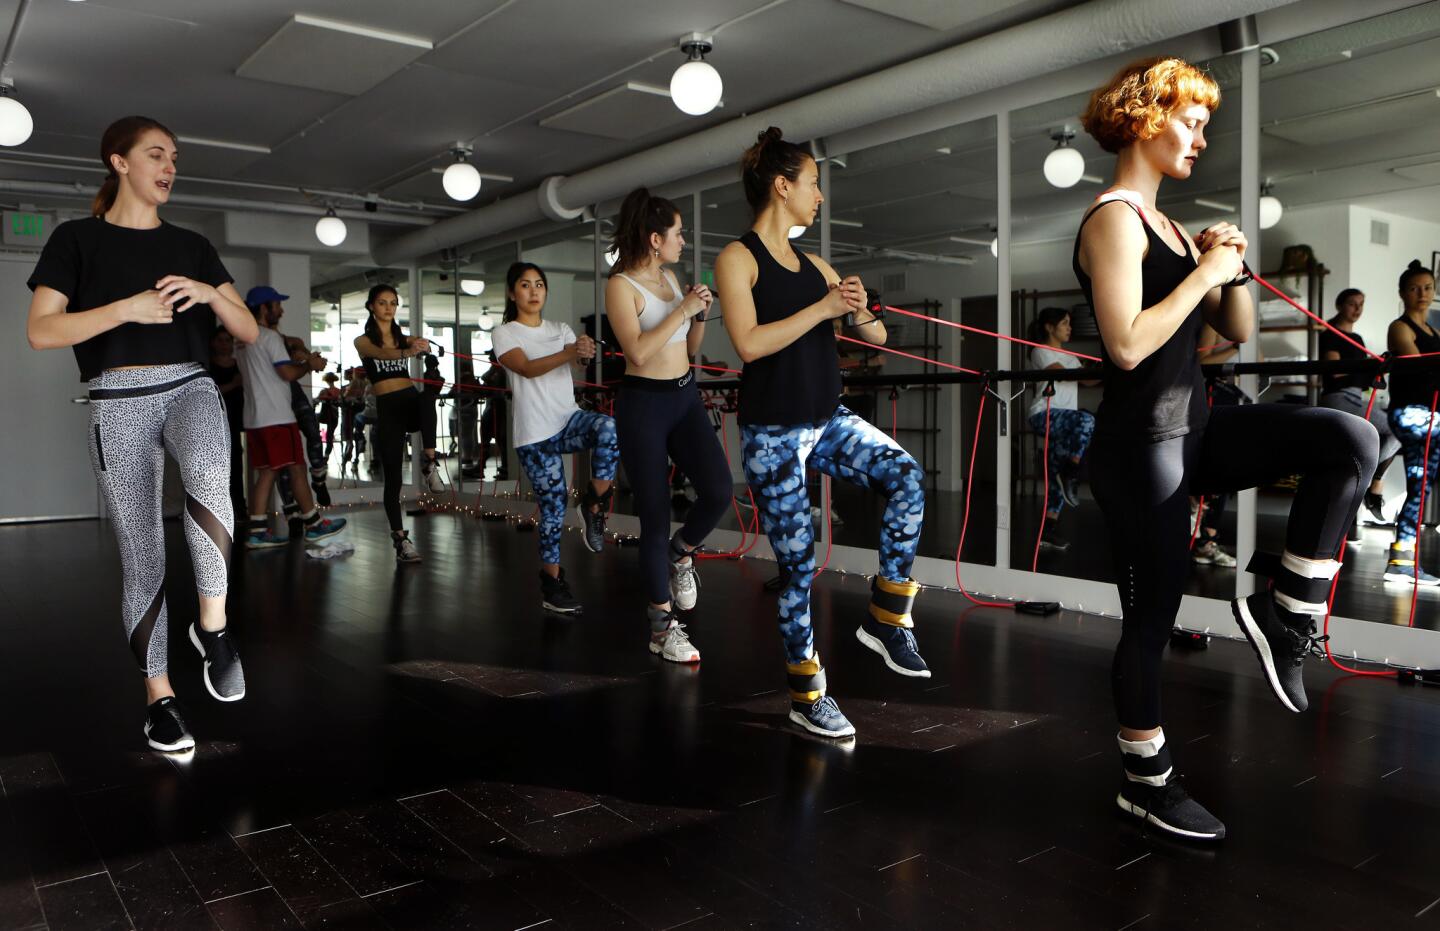 Trainer Keely Ahrold, left, instructs participants in a ModelFIT sculpt class as they use bands to create resistance.